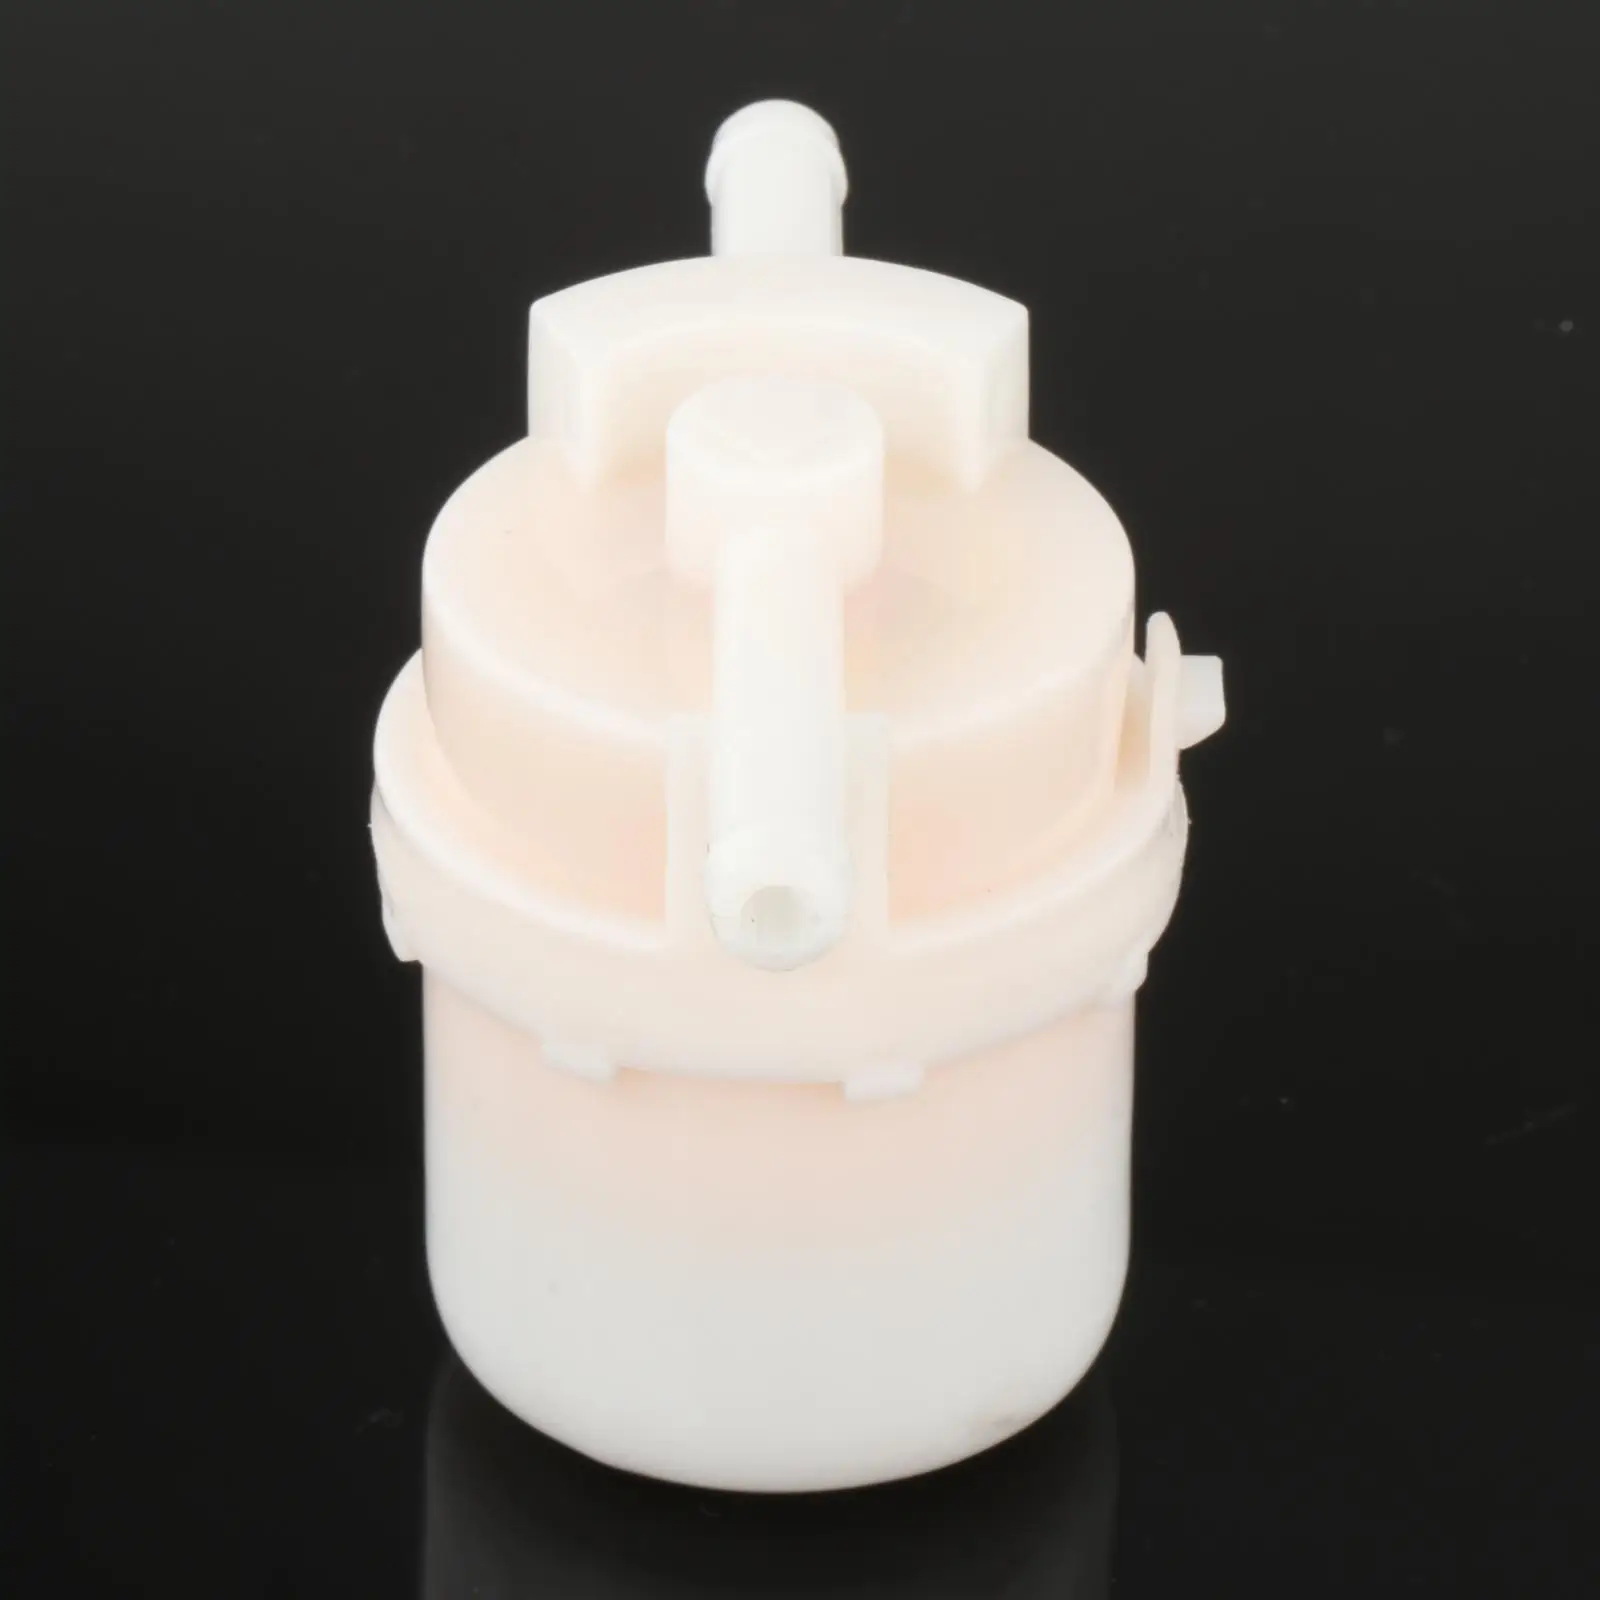 Fuel Filter 16900-Sa5-004 Fit for Honda Outboard Parts 35, 40, 45, 50, 75, 90 Durable